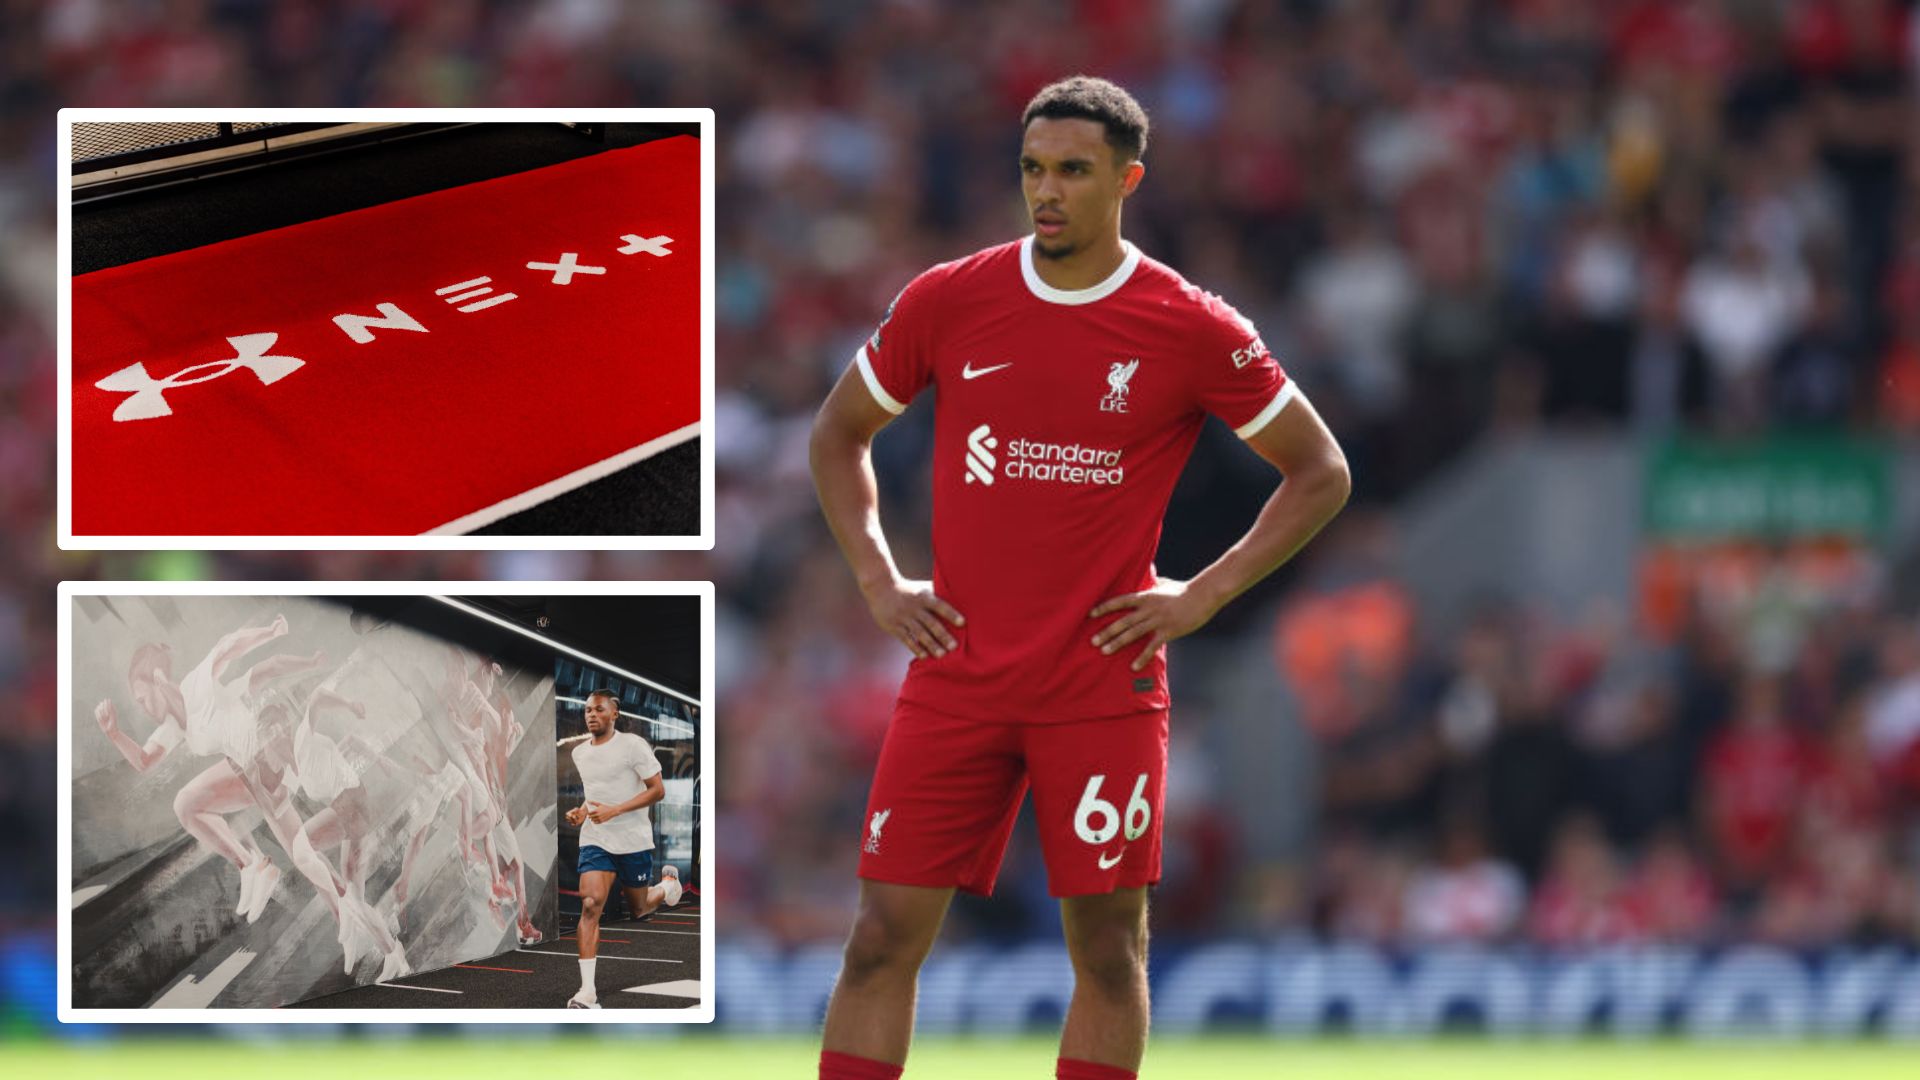 Inside Under Armours' football talent factory where they're attempting to unearth the next Trent Alexander-Arnold